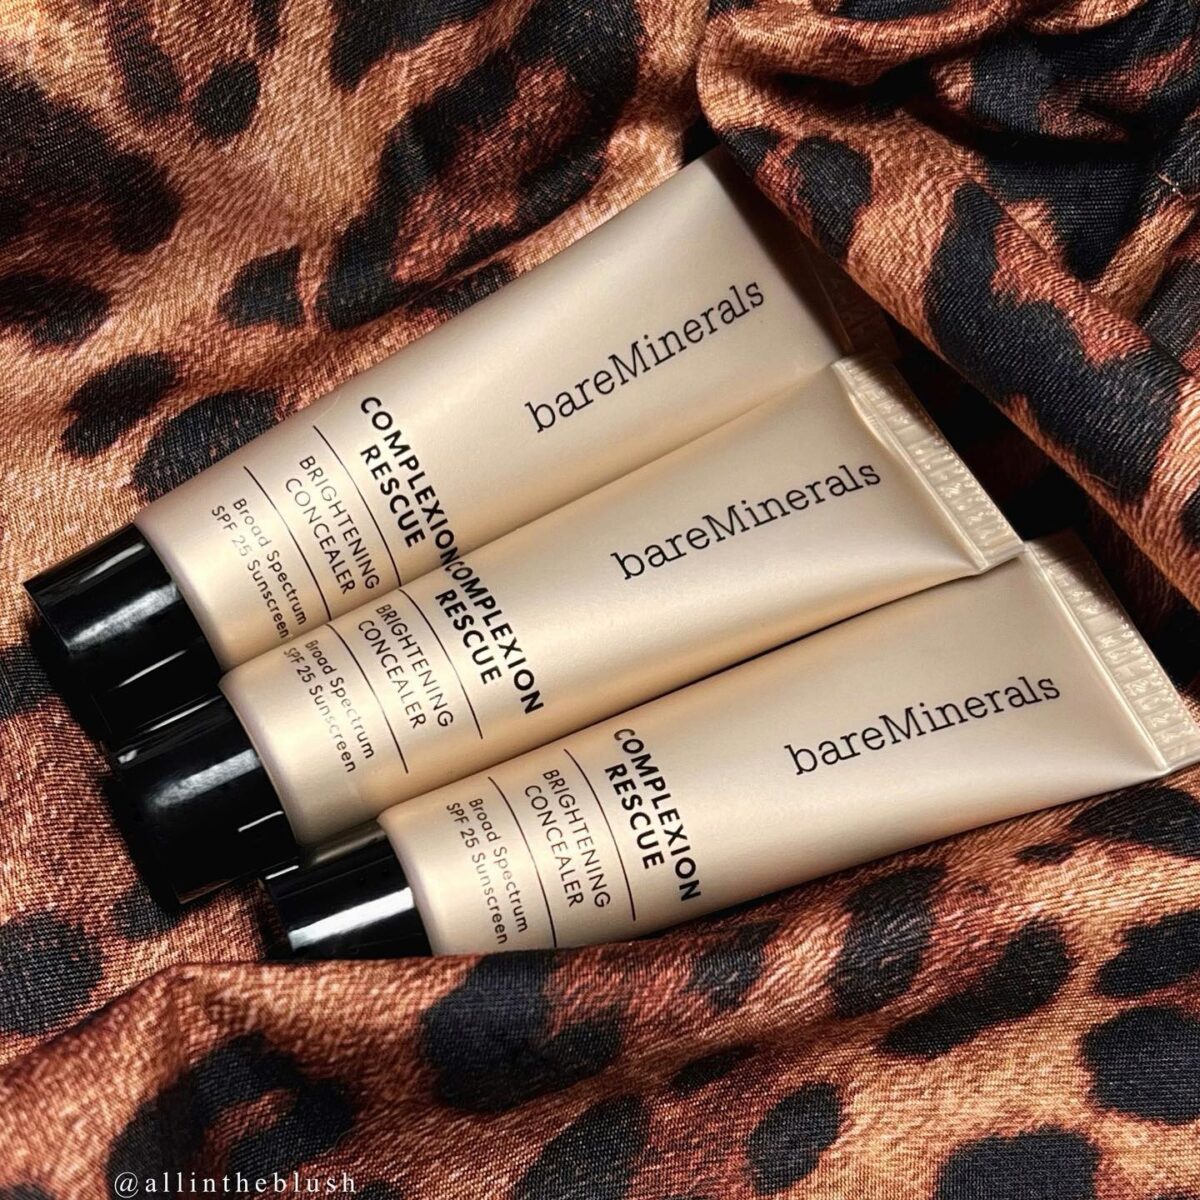 NEW From BareMinerals: Complexion Rescue Brightening Under Eye Concealer SPF 25 - Review & Swatches